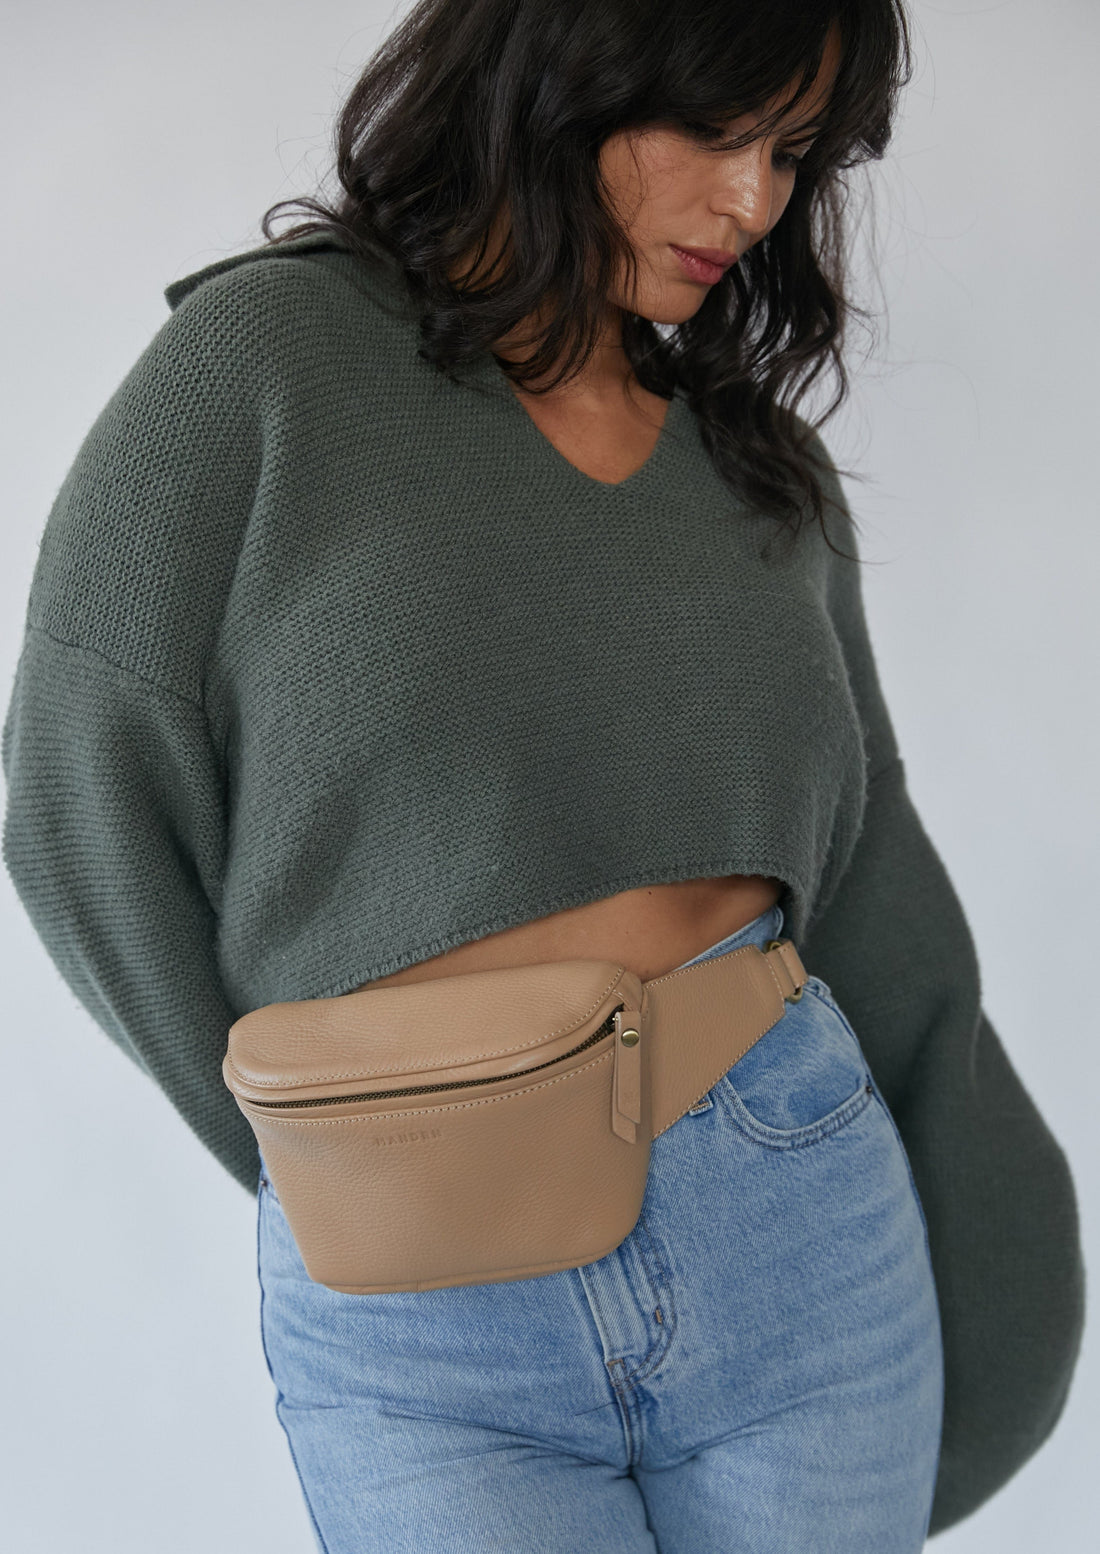 MANDRN  The Woven Remy- Tan Leather Fanny Pack